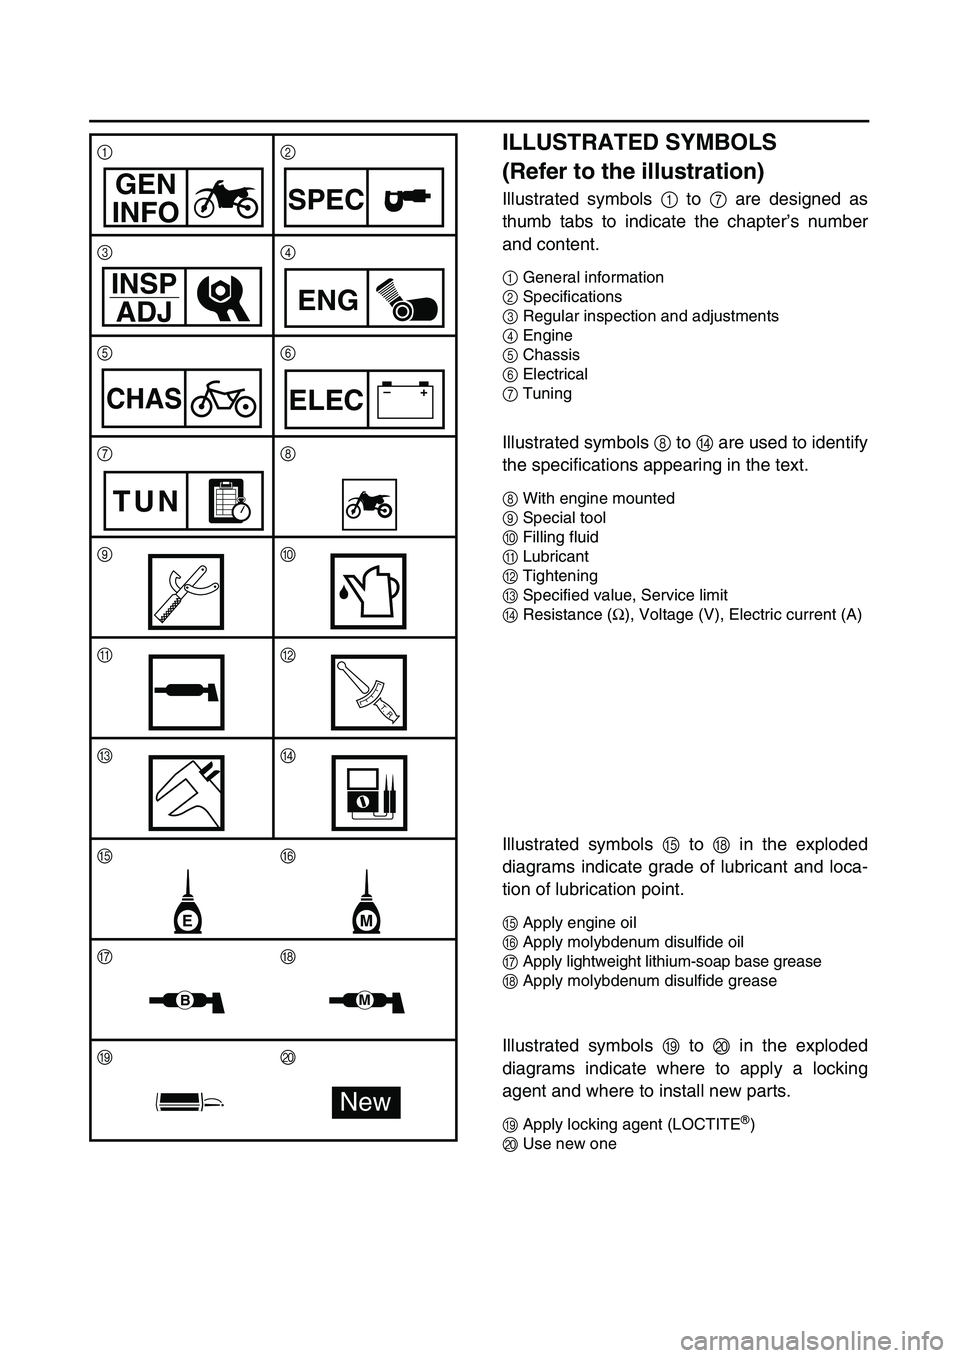 YAMAHA WR 426F 2002  Notices Demploi (in French)  
ILLUSTRATED SYMBOLS 
(Refer to the illustration) 
Illustrated symbols   
1  
 to   
7  
 are designed as
thumb tabs to indicate the chapter’s number
and content. 
1  
General information  
2  
Spe